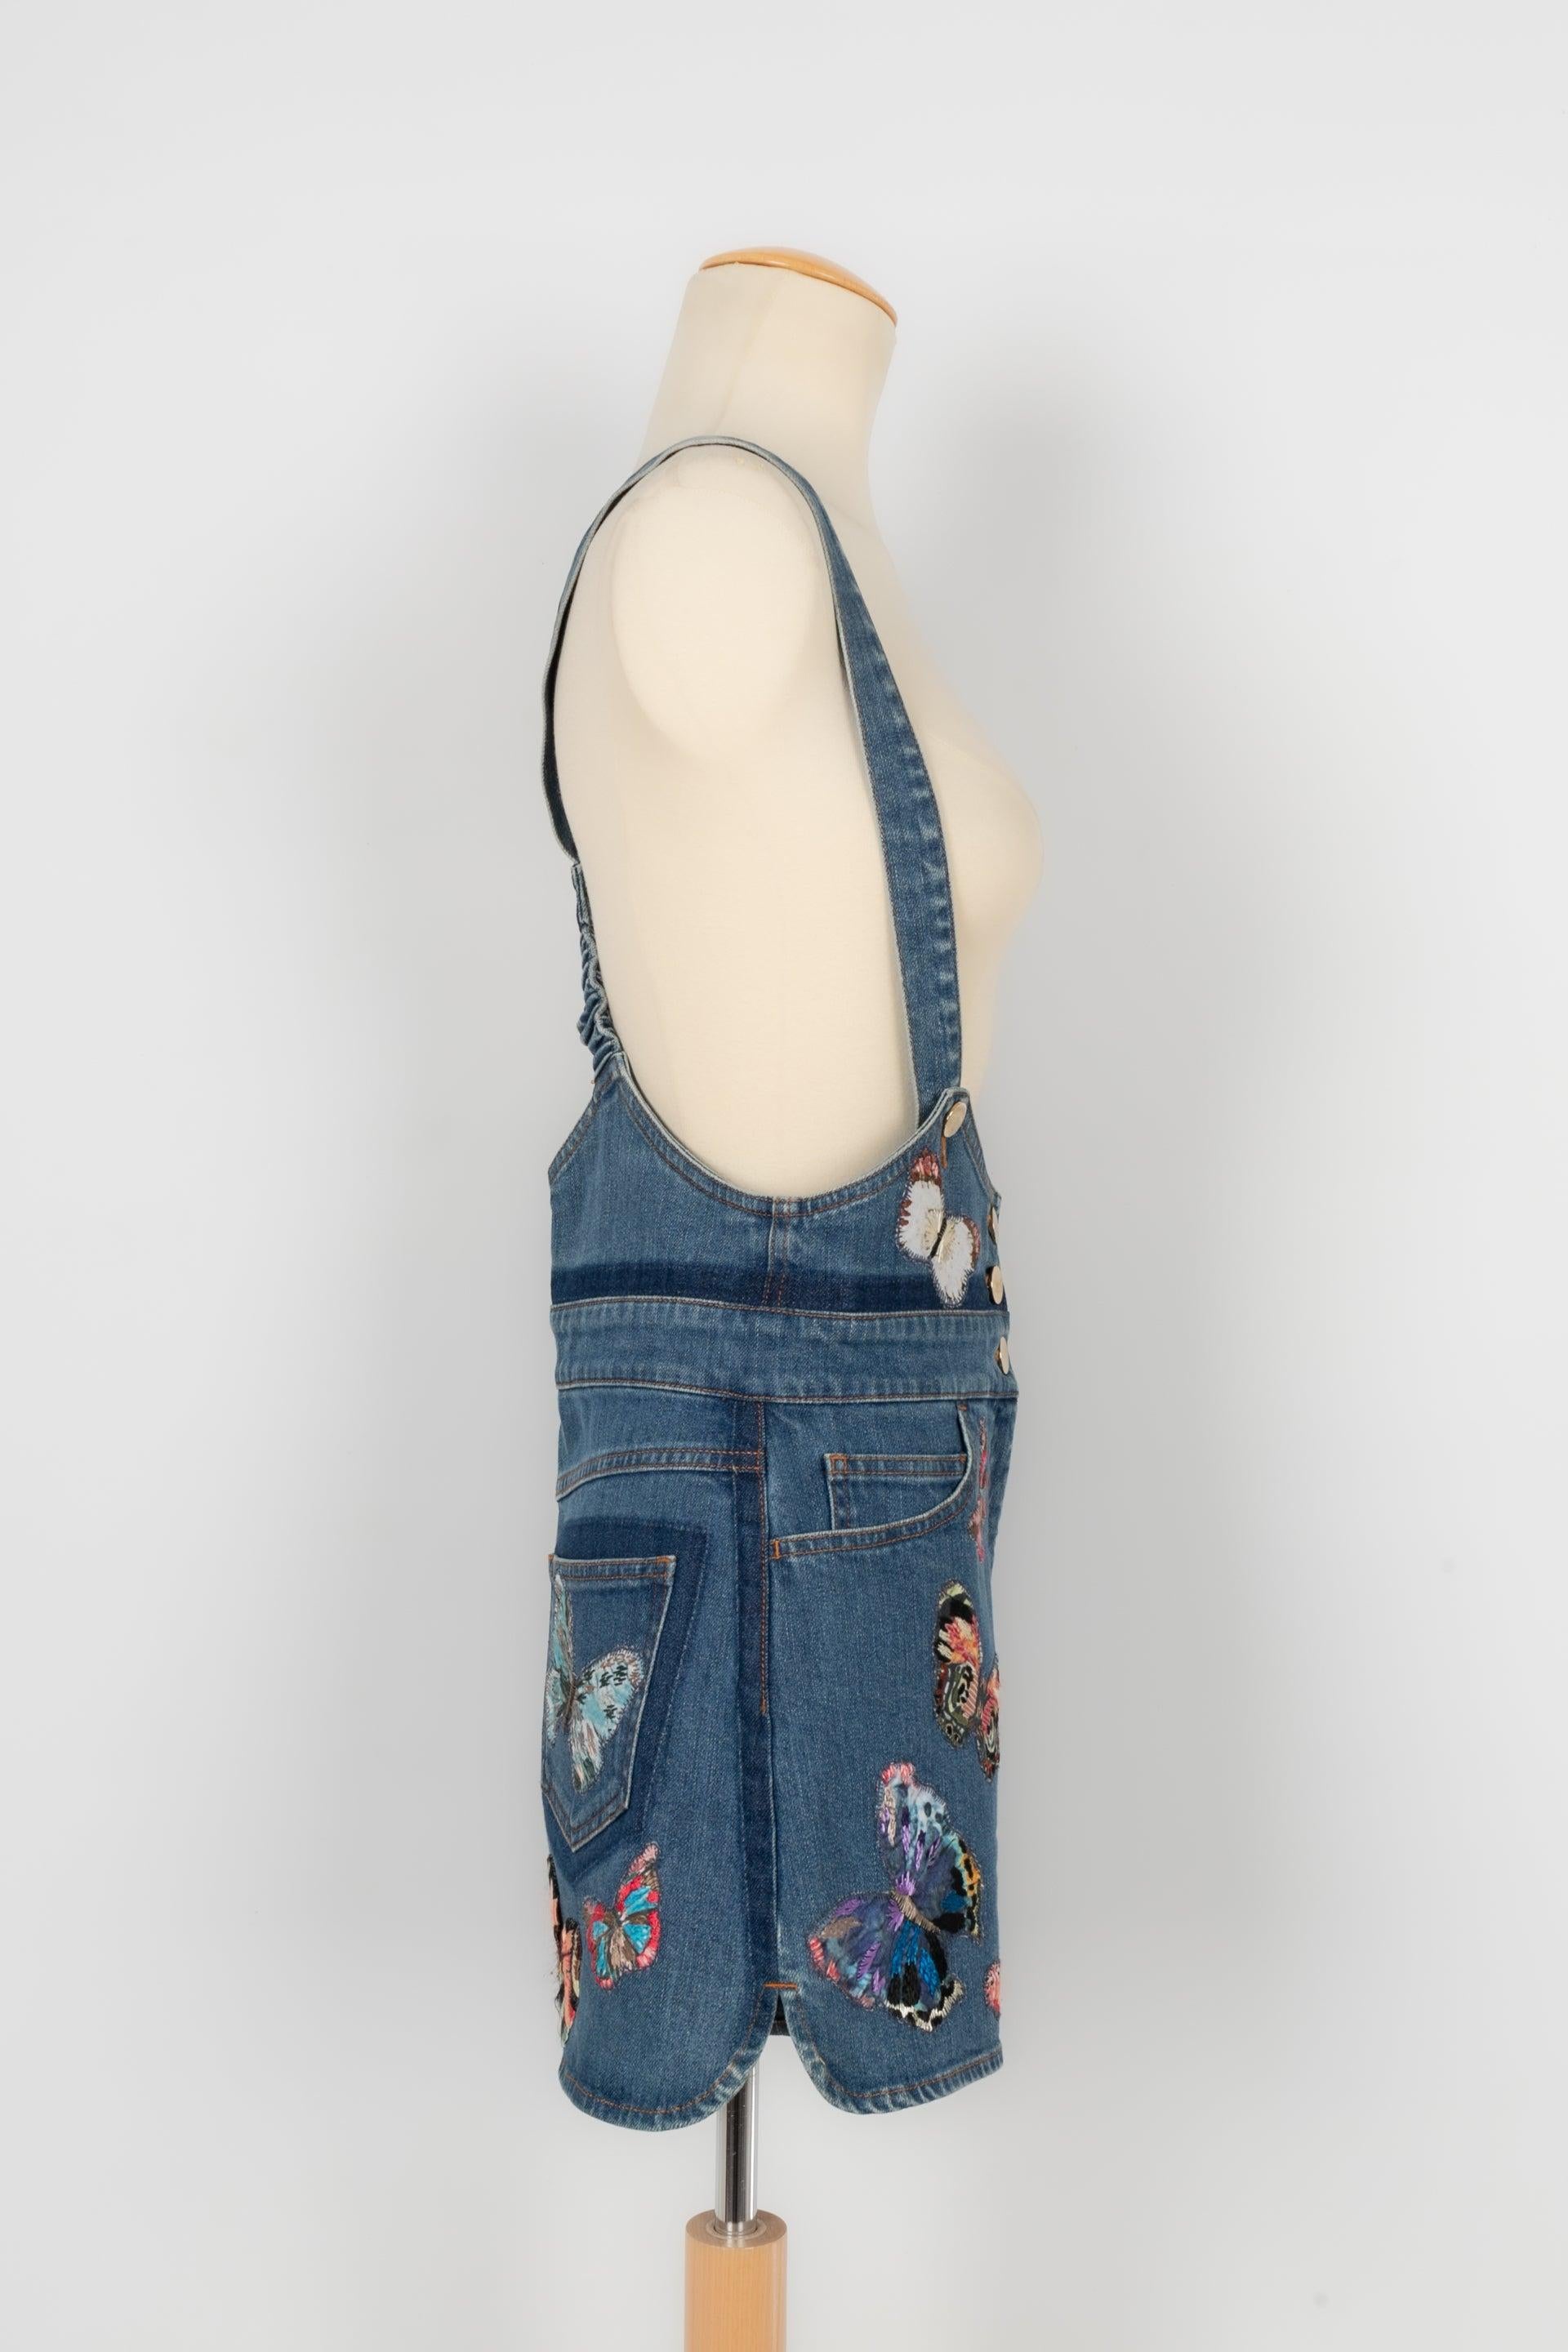 Valentino - (Made in Italy) Denim dungaree ornamented with butterflies. Indicated size 27, it fits a 36FR. Pre-Fall 2016 Collection.

Additional information:
Condition: Very good condition
Dimensions: Waist: 36 cm
Height: 80 cm

Seller reference: